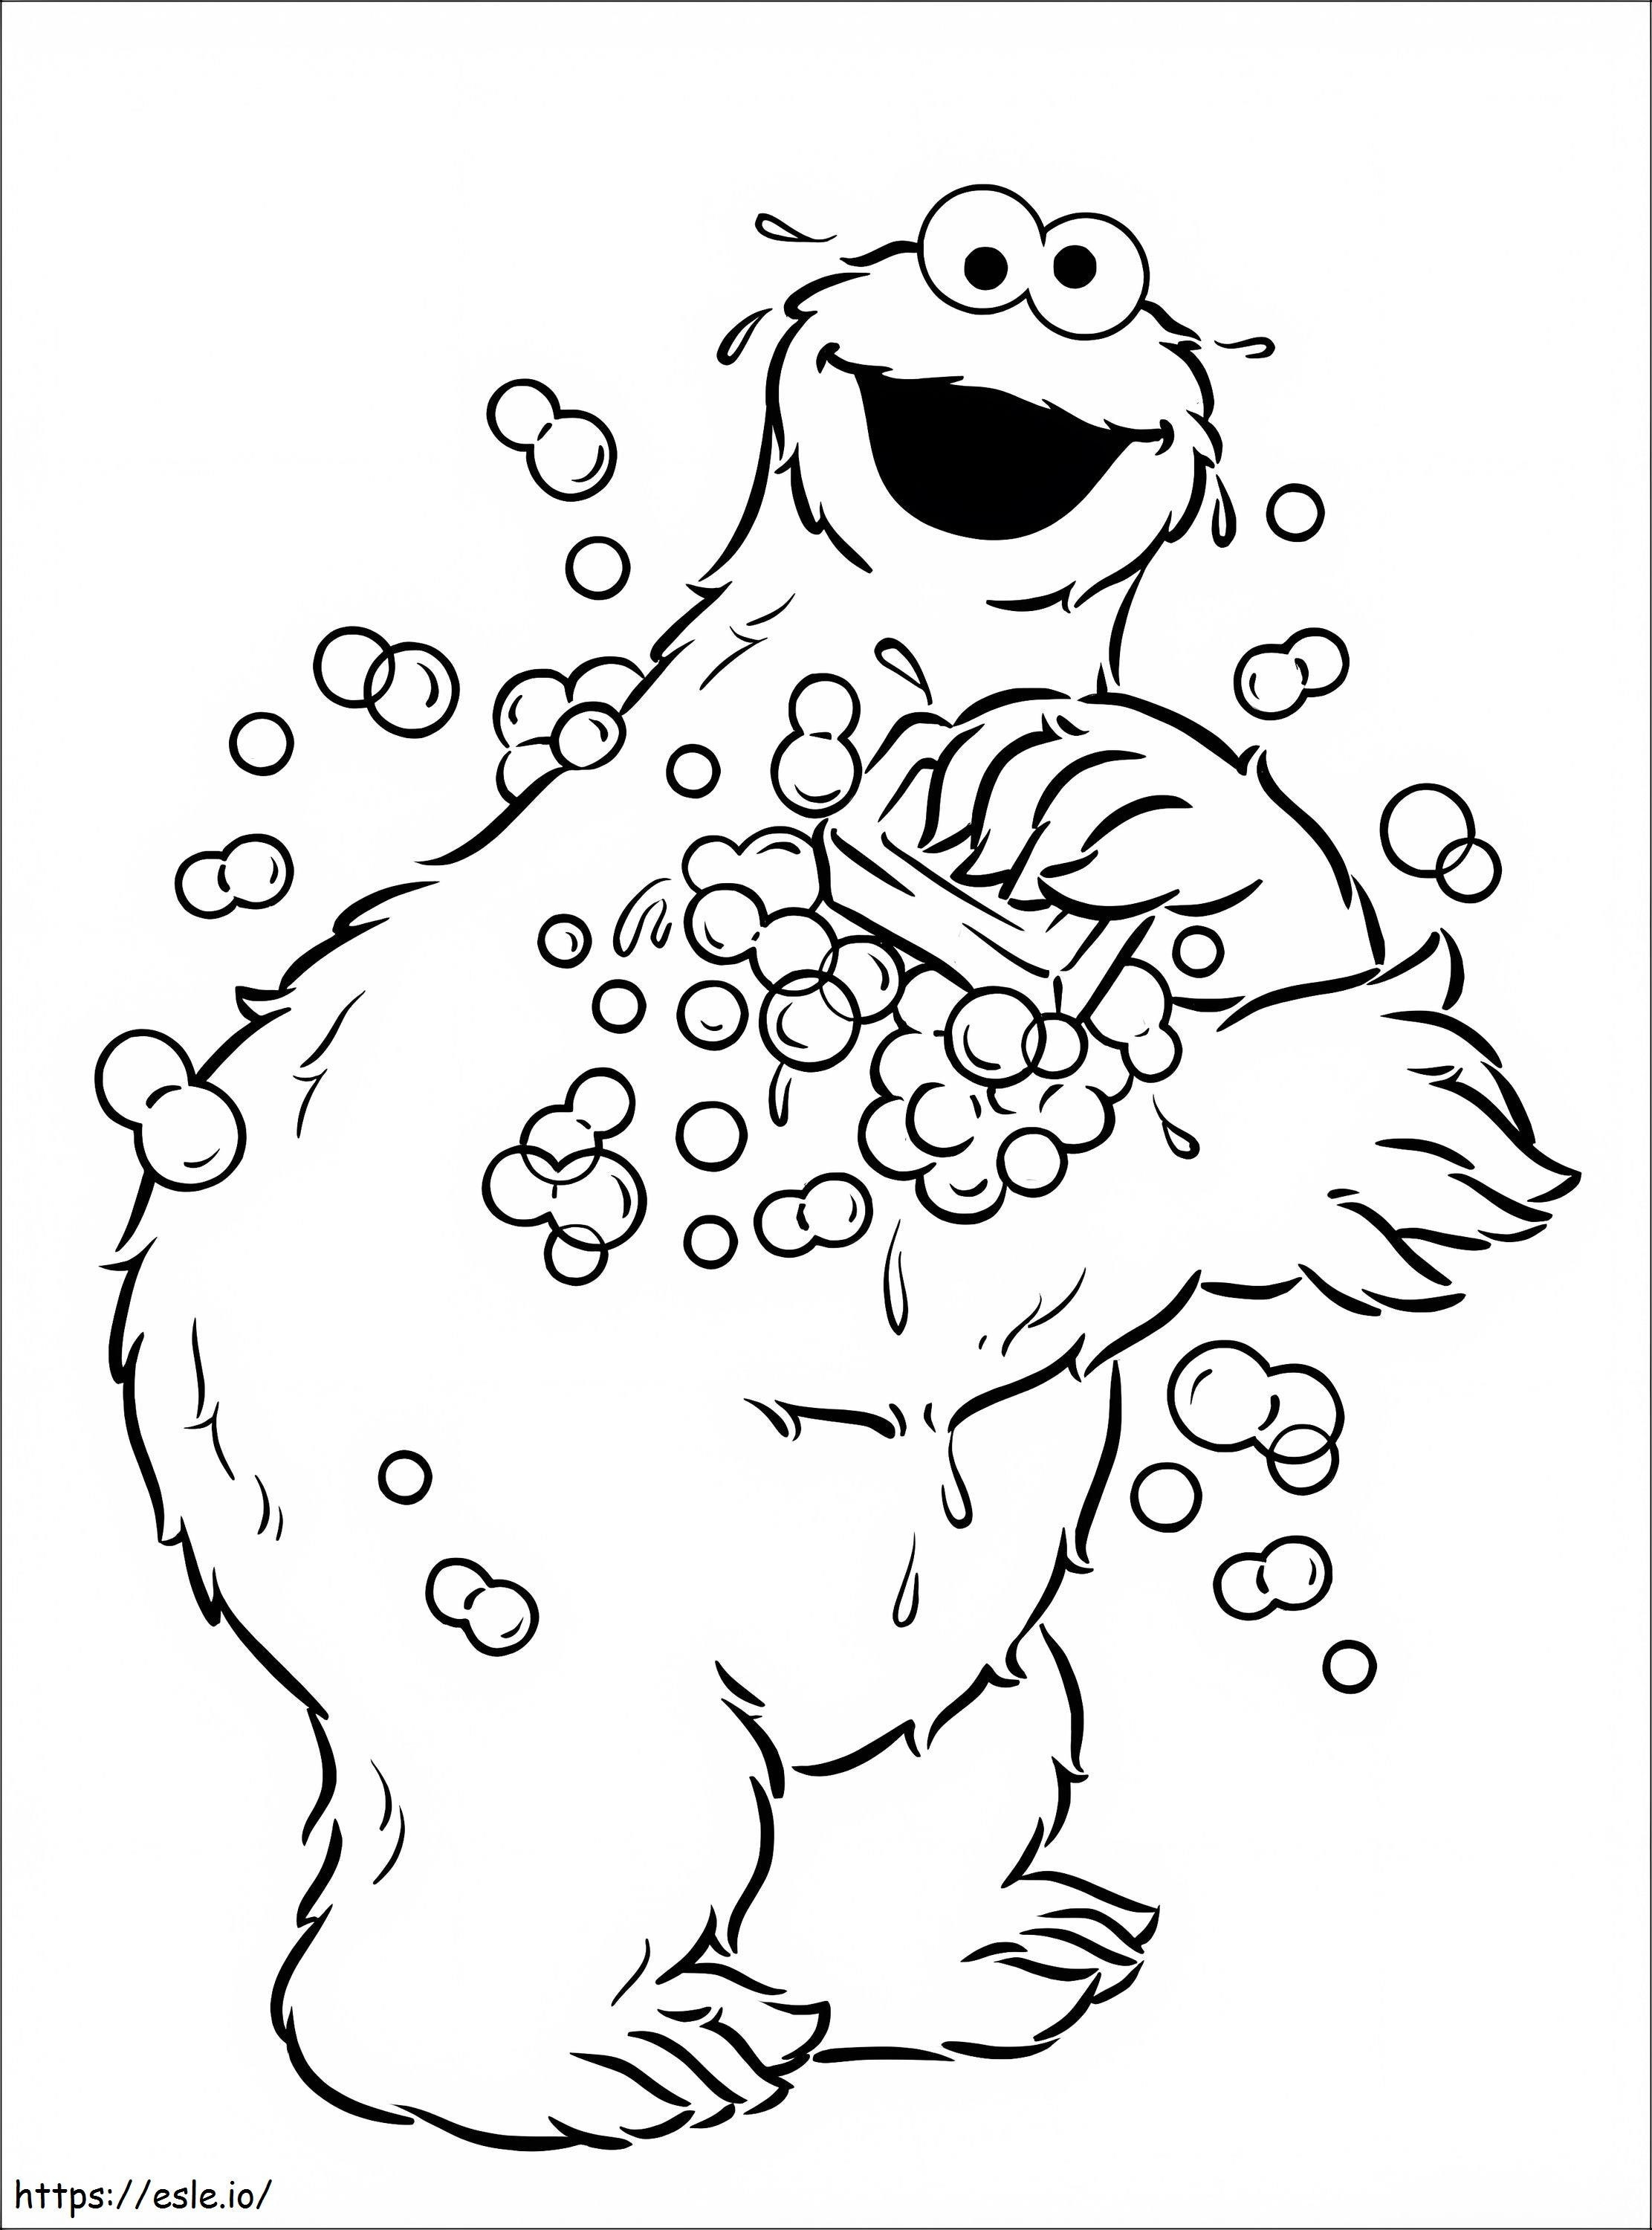 Cookie Monster Showering coloring page